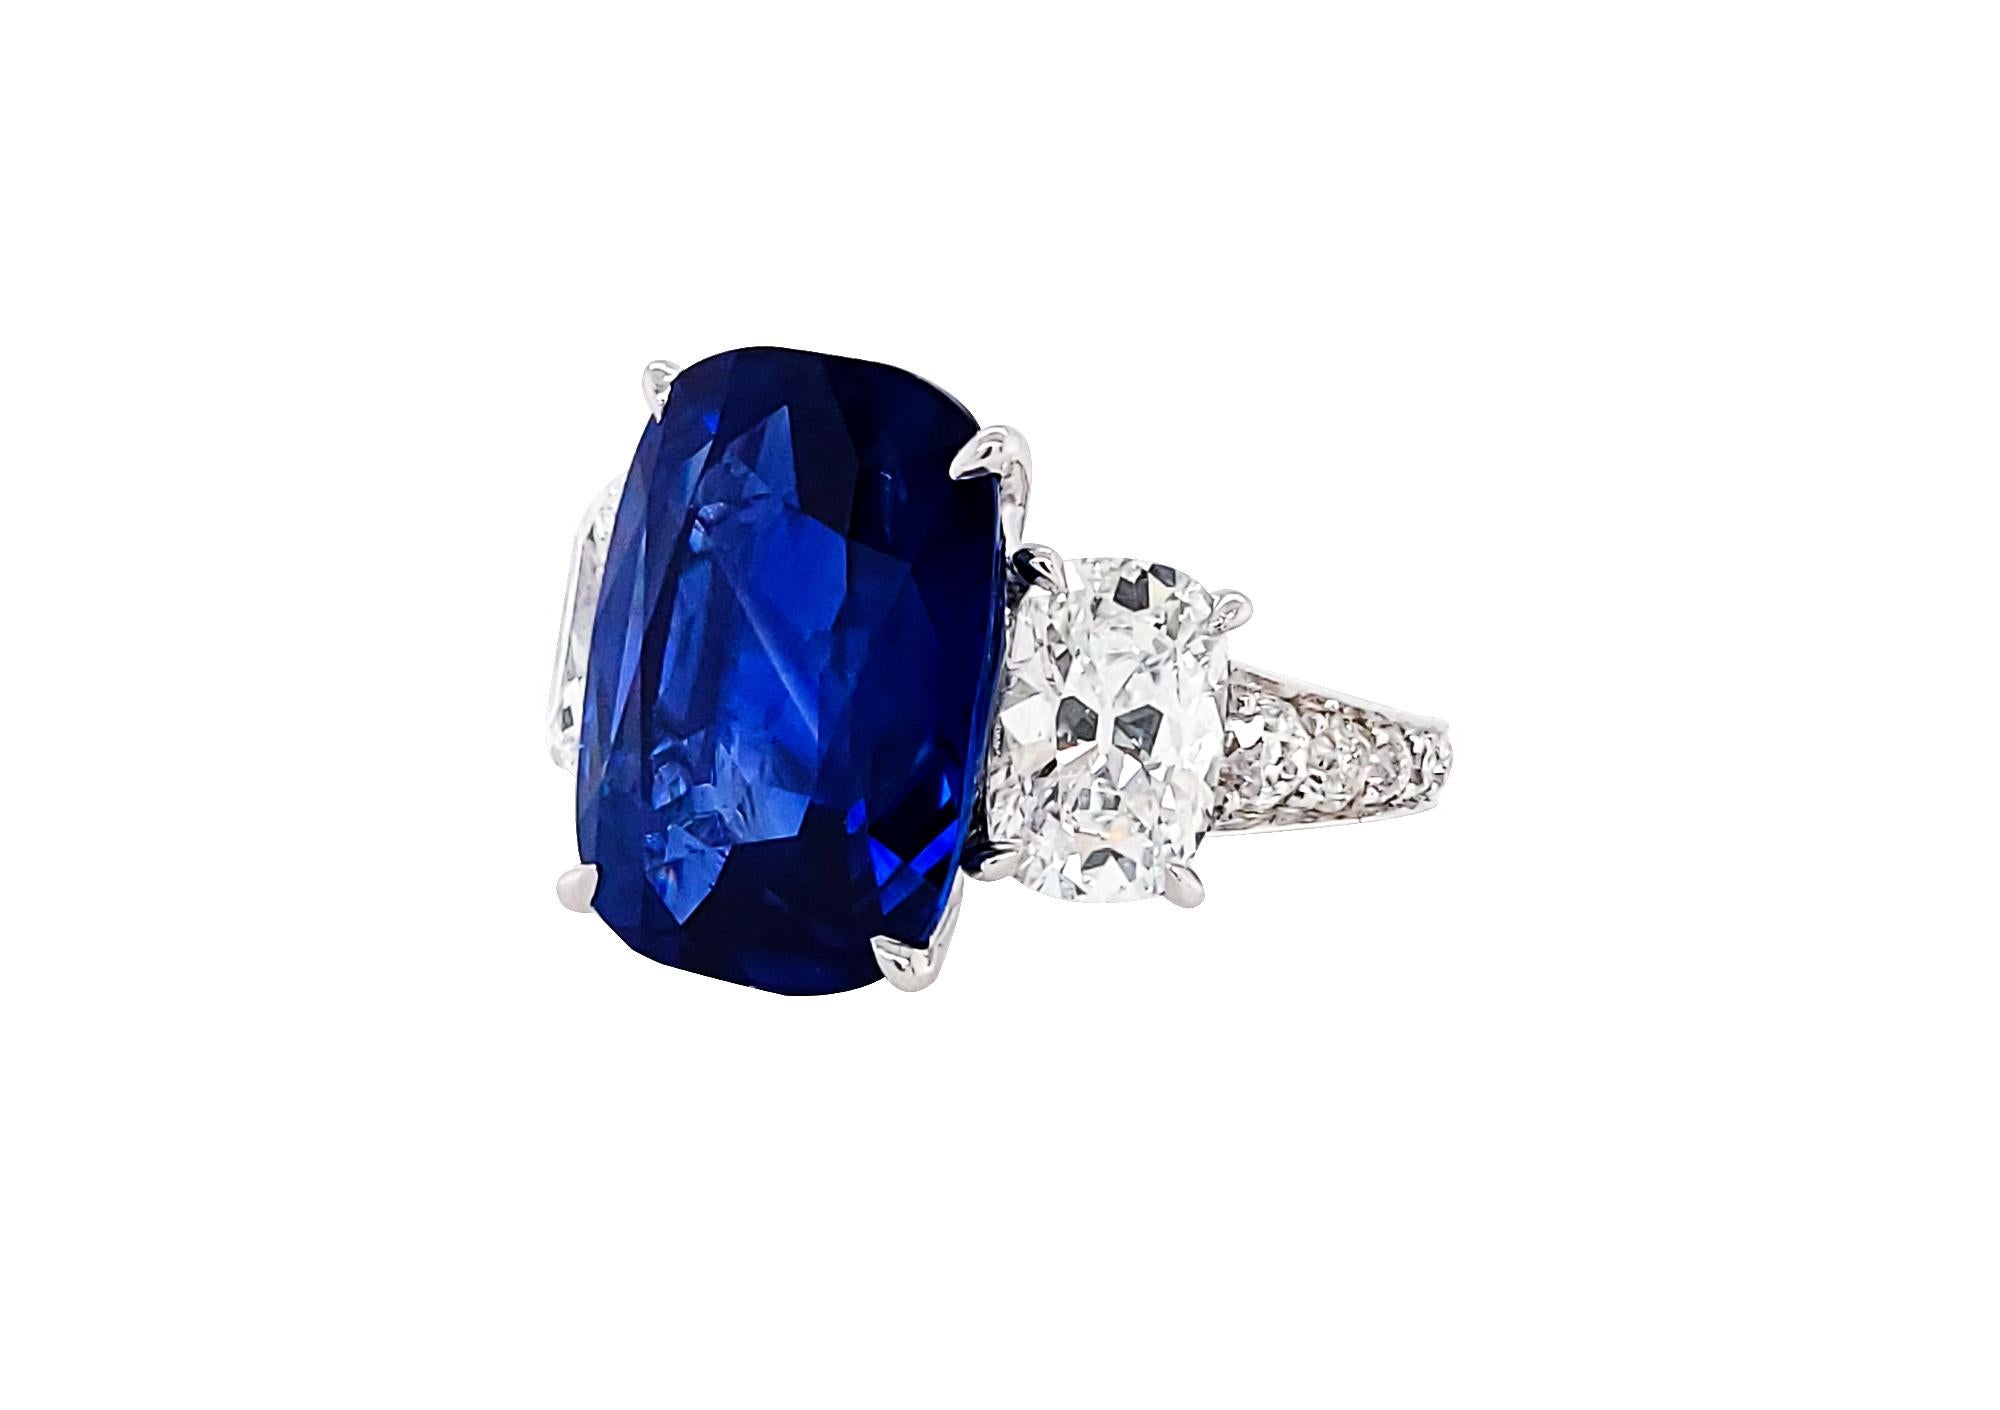 This ring is a rare find. It is featuring a 10.58 carat cushion blue sapphire, two cushion diamonds on both sides and pave diamonds half-way down the band. 
The sapphire is certified by AGL stating that it's of Ceylon origin with no indication of